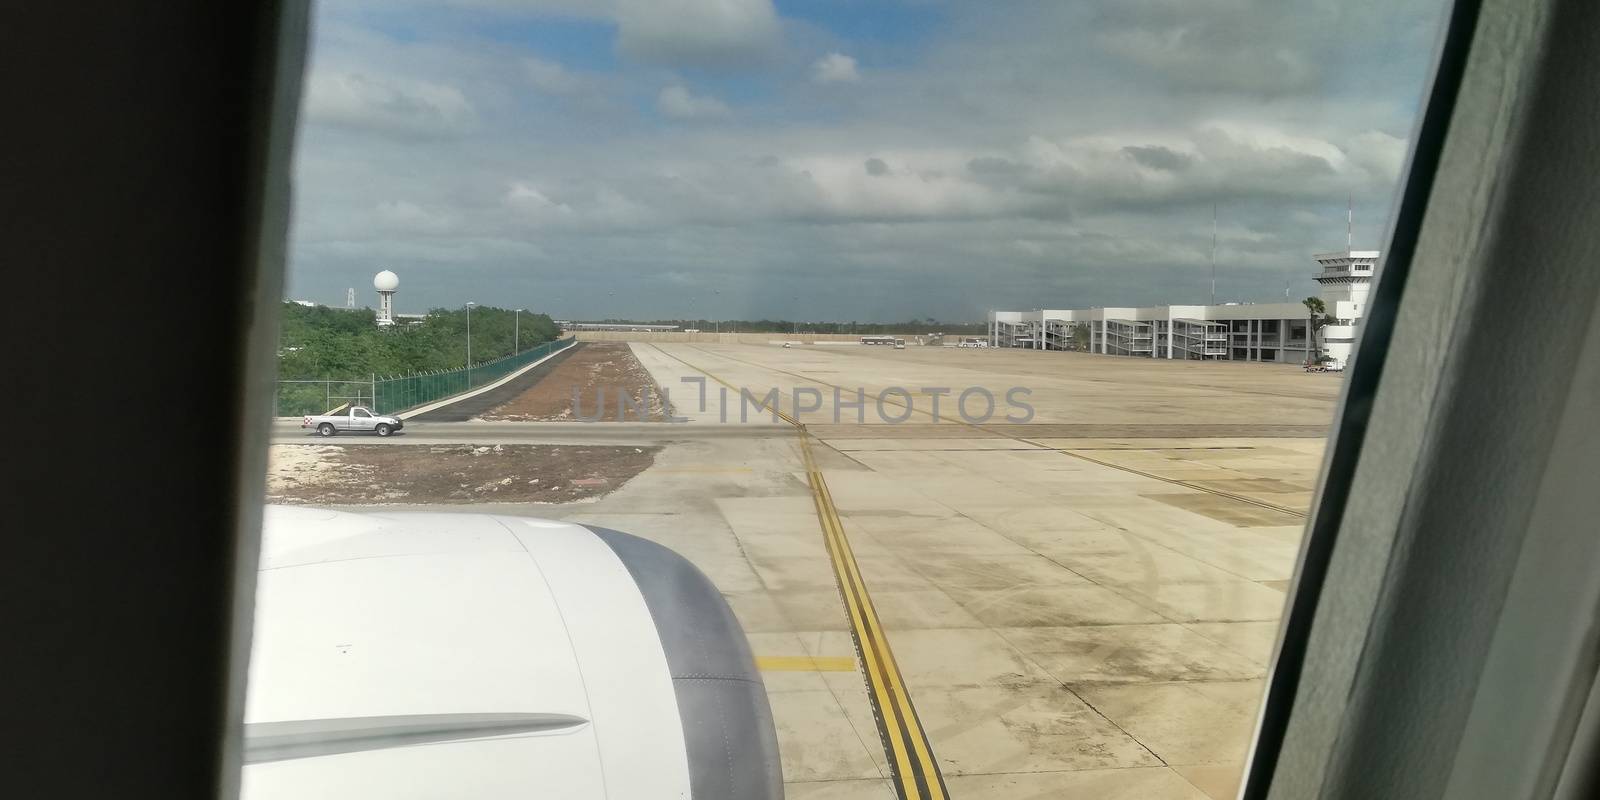 Cancun airport from a plane by pippocarlot